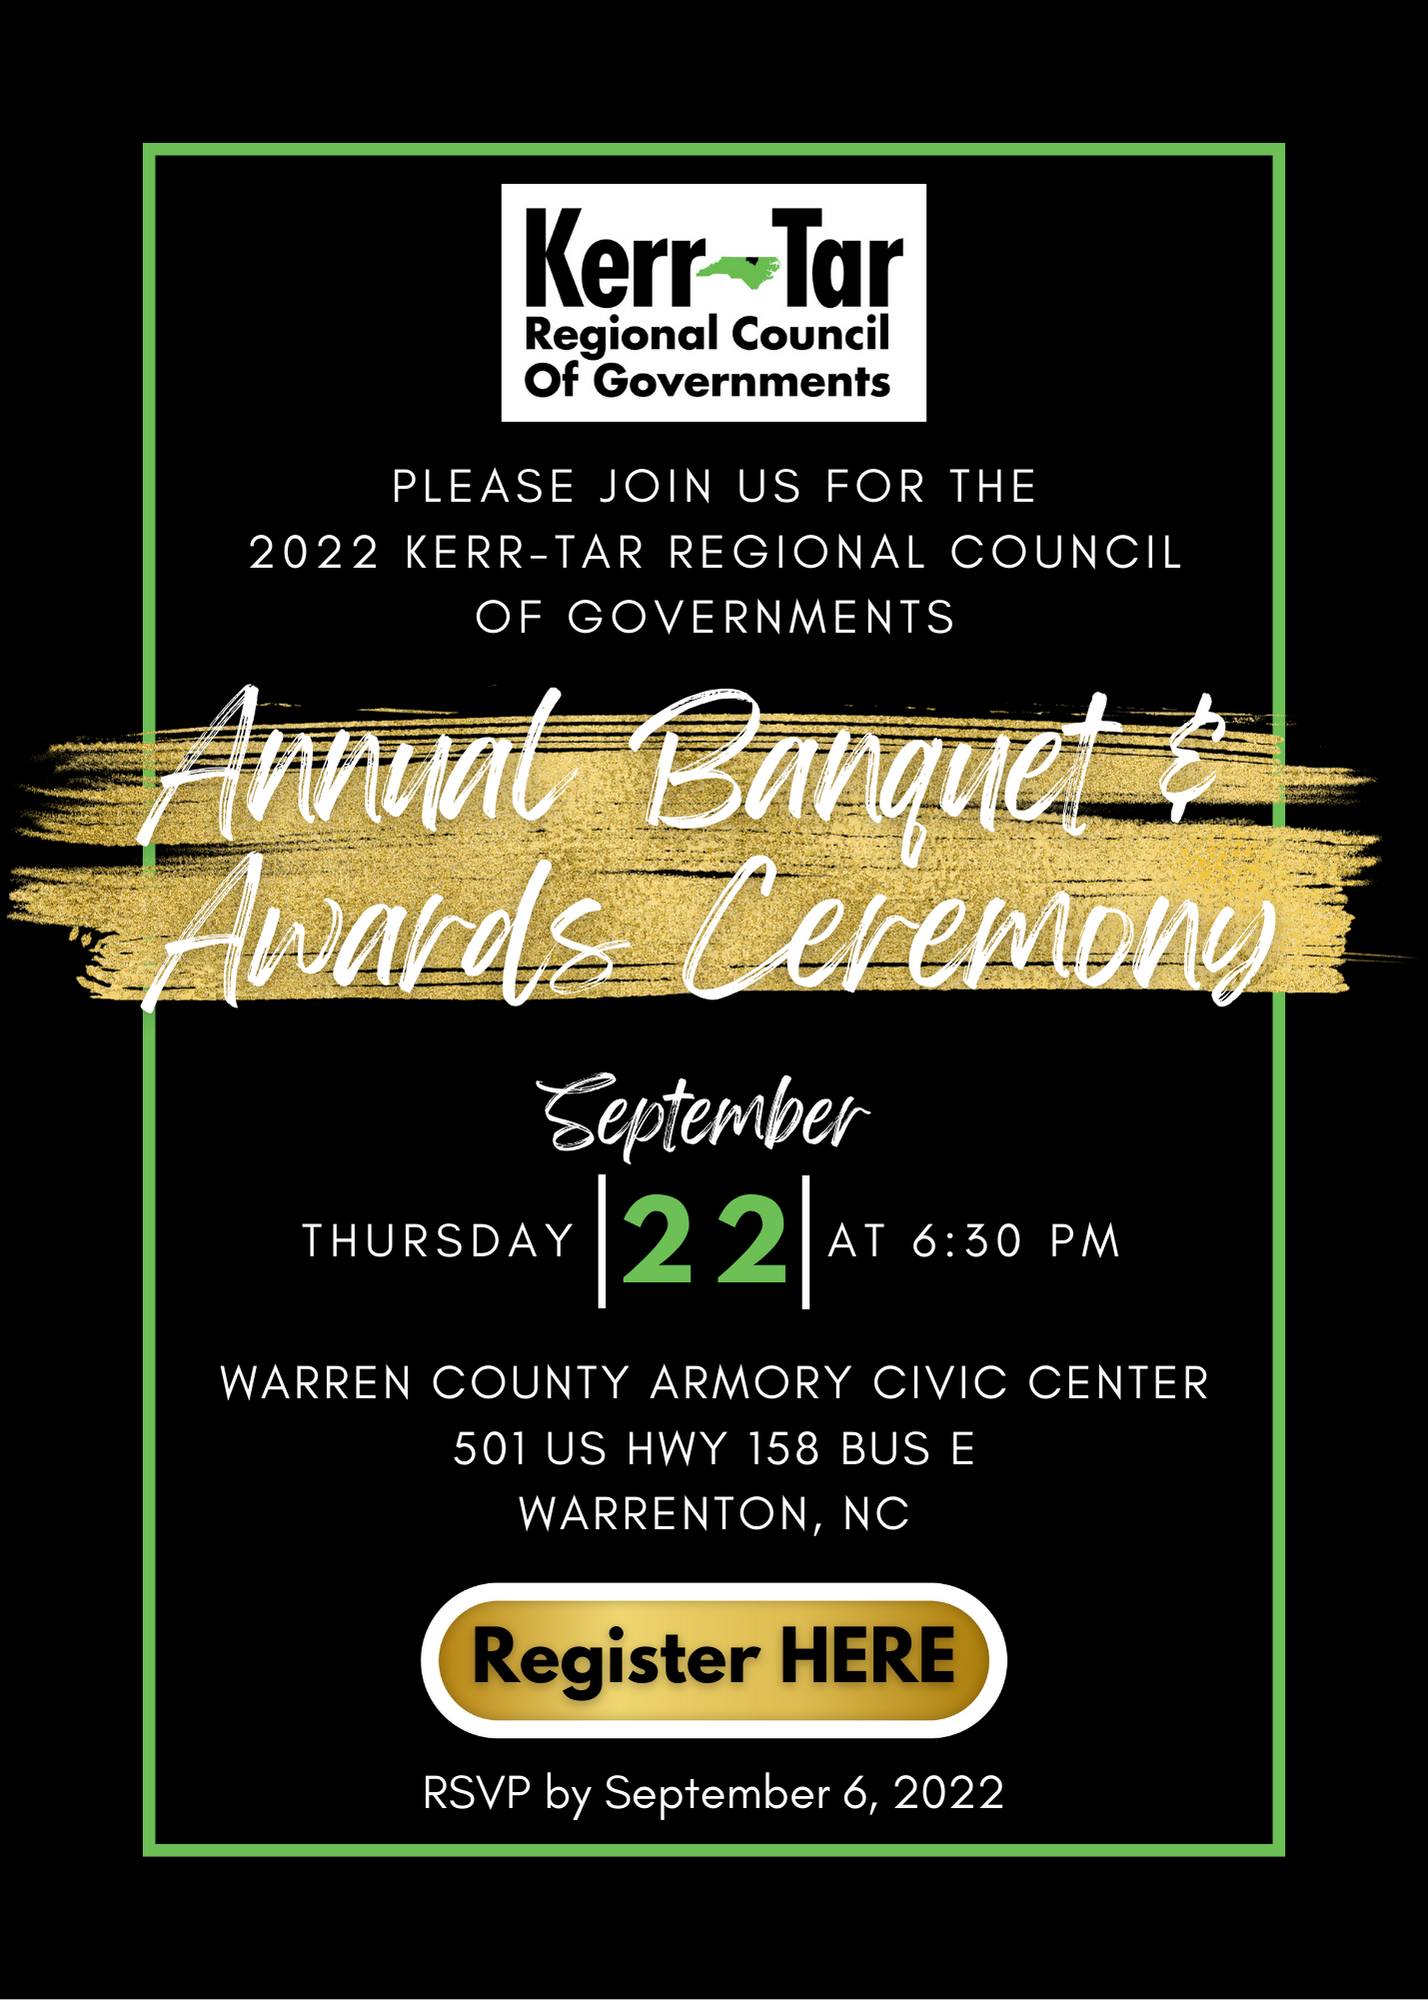 2022 Kerr-Tar Regional Council of Governments Annual Banquet and Awards Ceremony